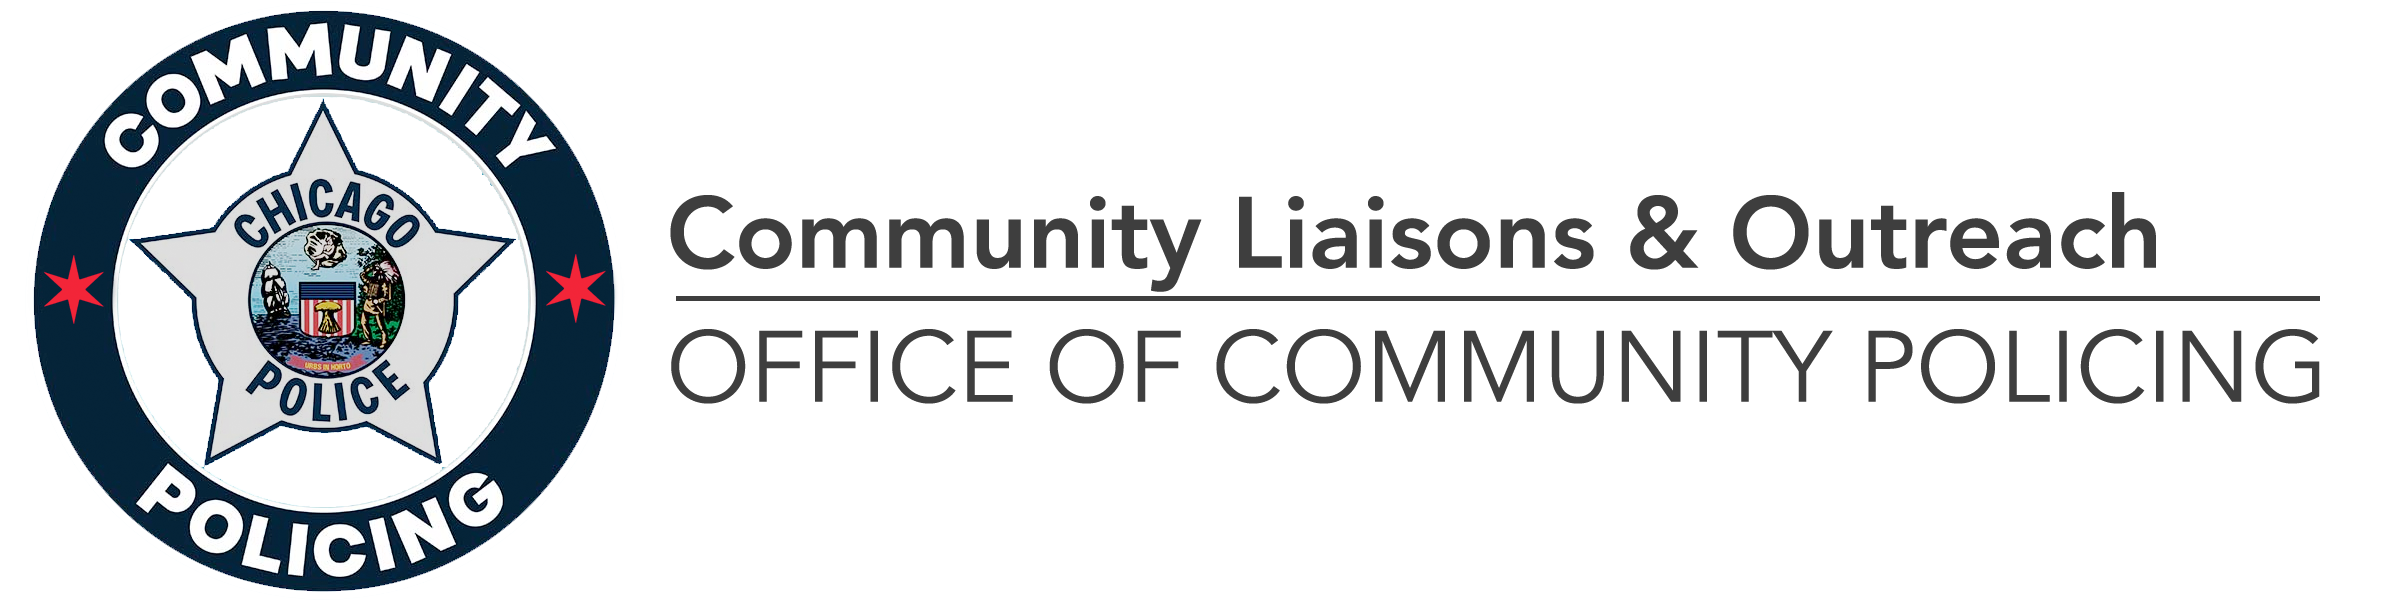 Community Liaisons And Outreach Chicago Police Department 